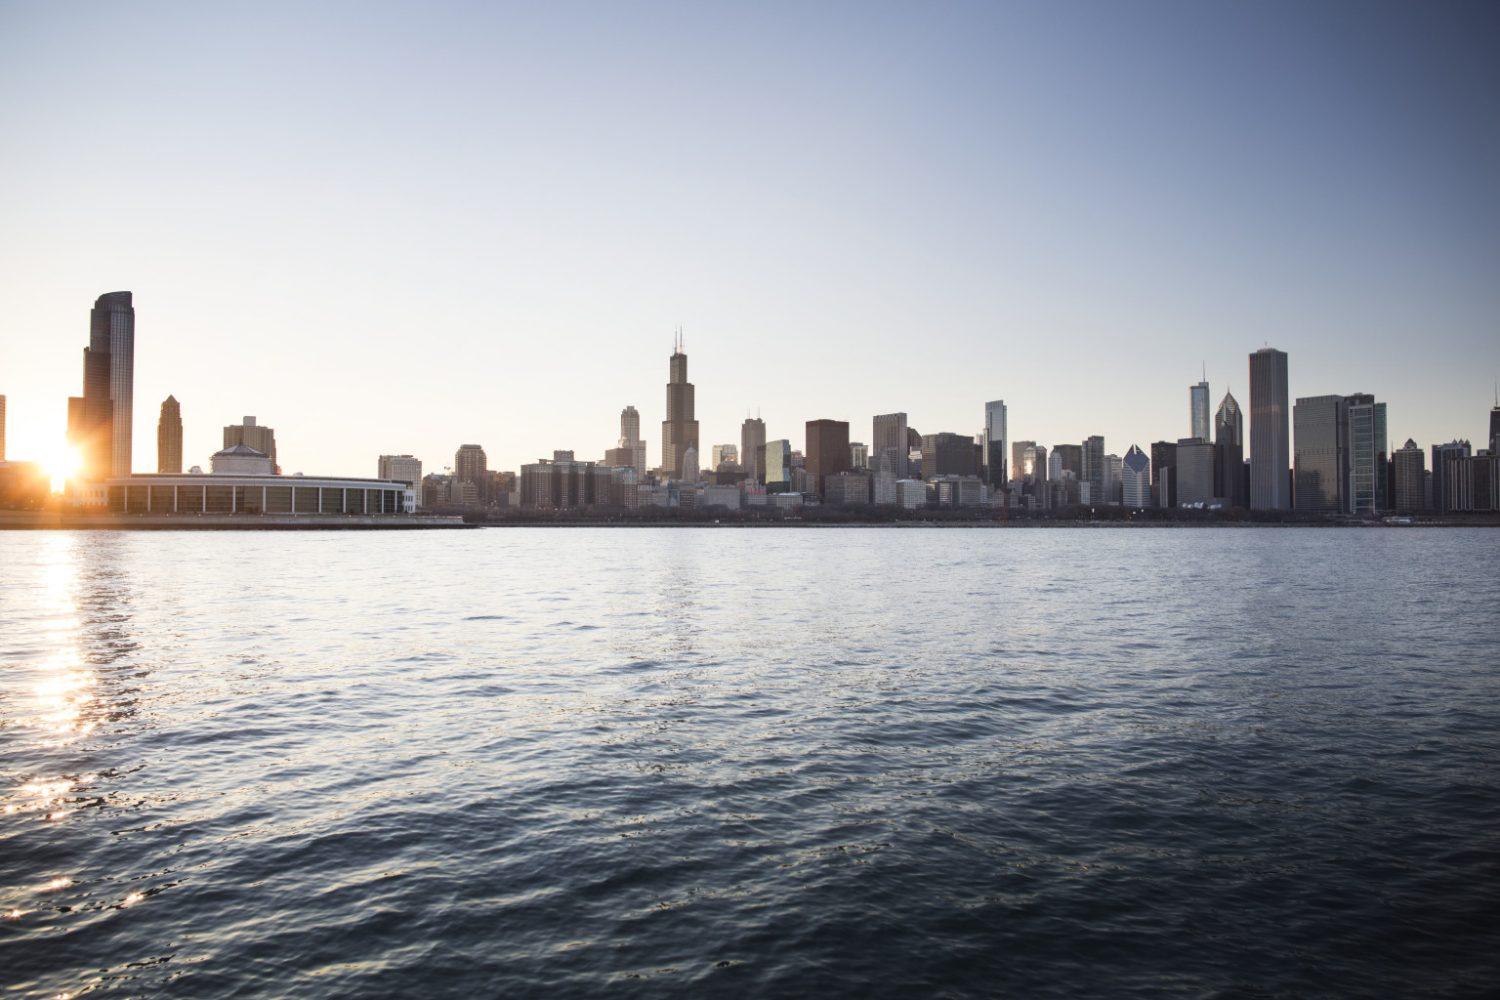 View+of+Chicago+Waterfront+Skyline+At+Sunset.